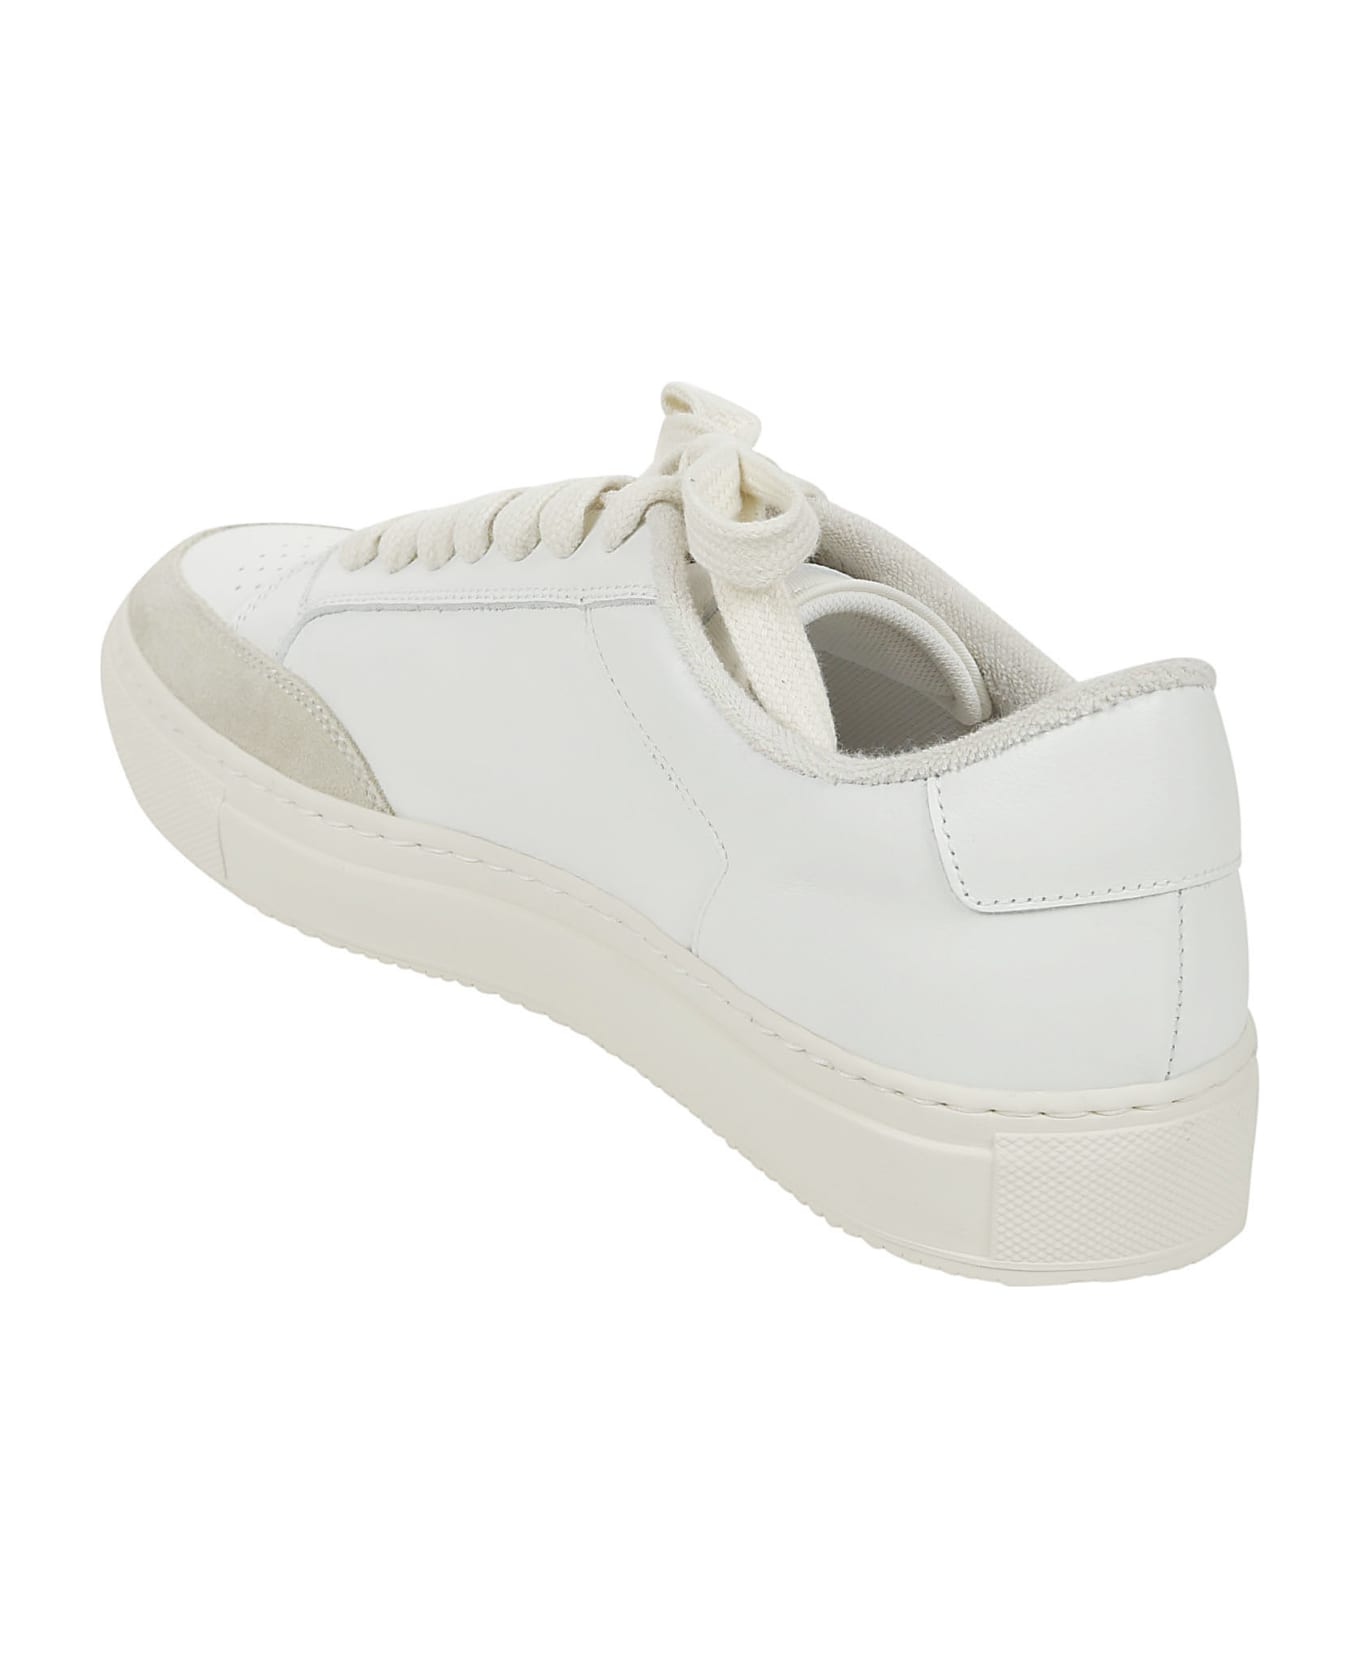 Common Projects Tennis Pro - White スニーカー